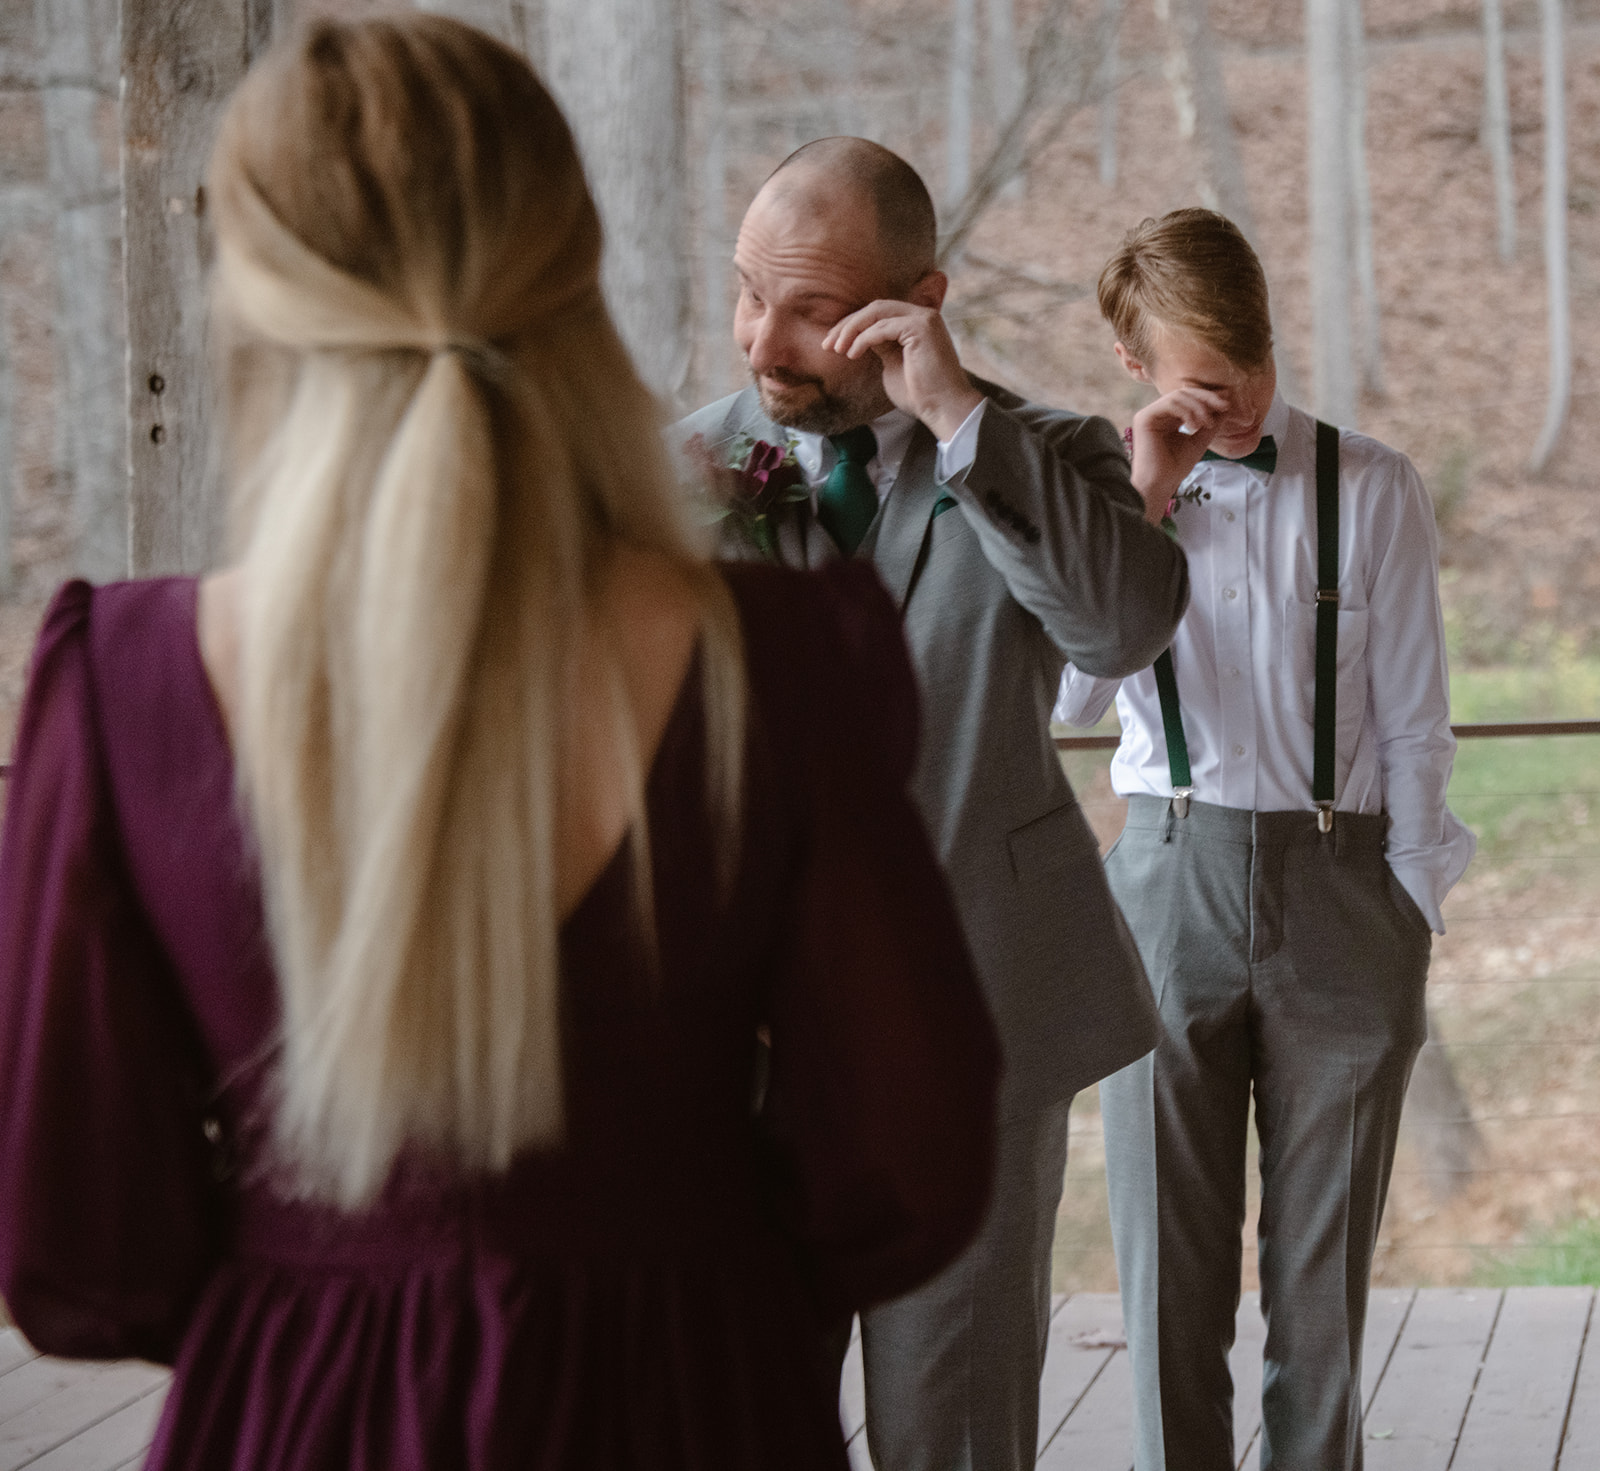 Groom and his son tear up with emotion as bride reaches the end of the aisle.